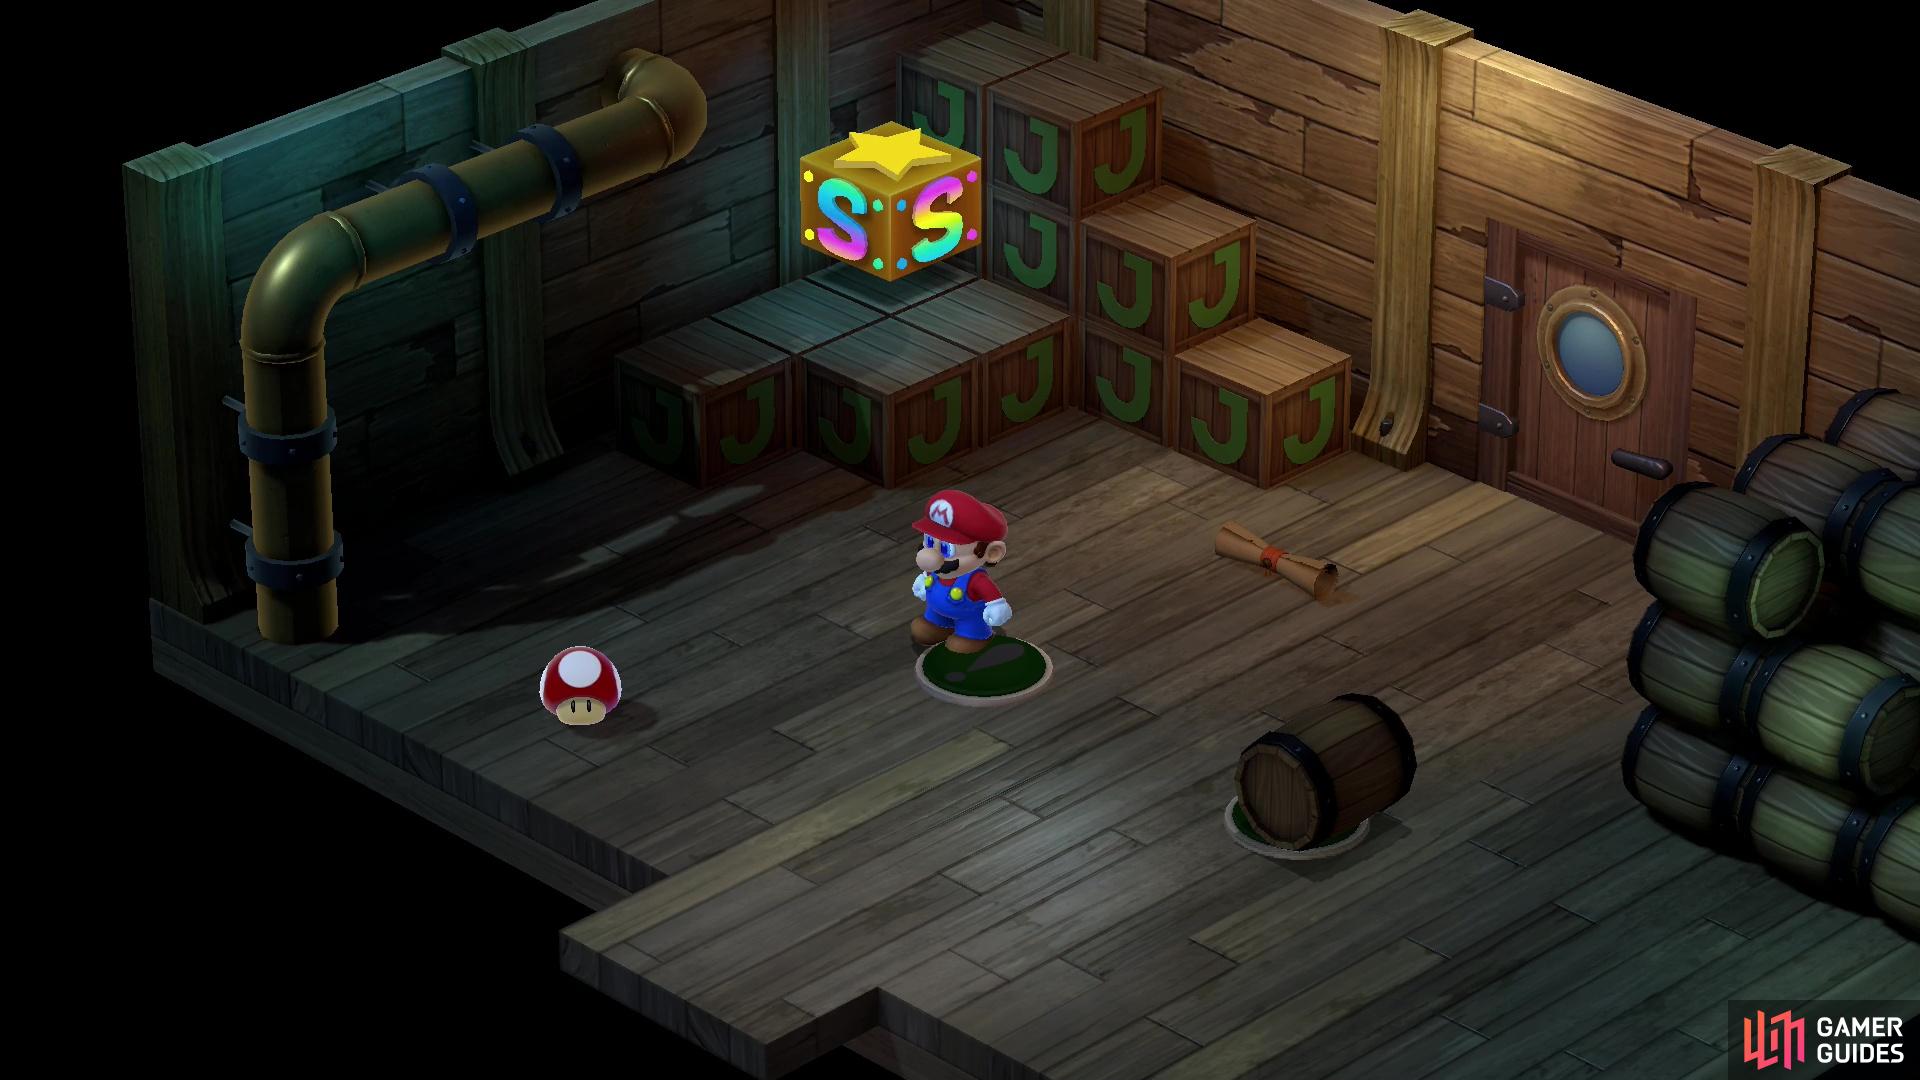 Jump on the other button with Mario to get the final clue.